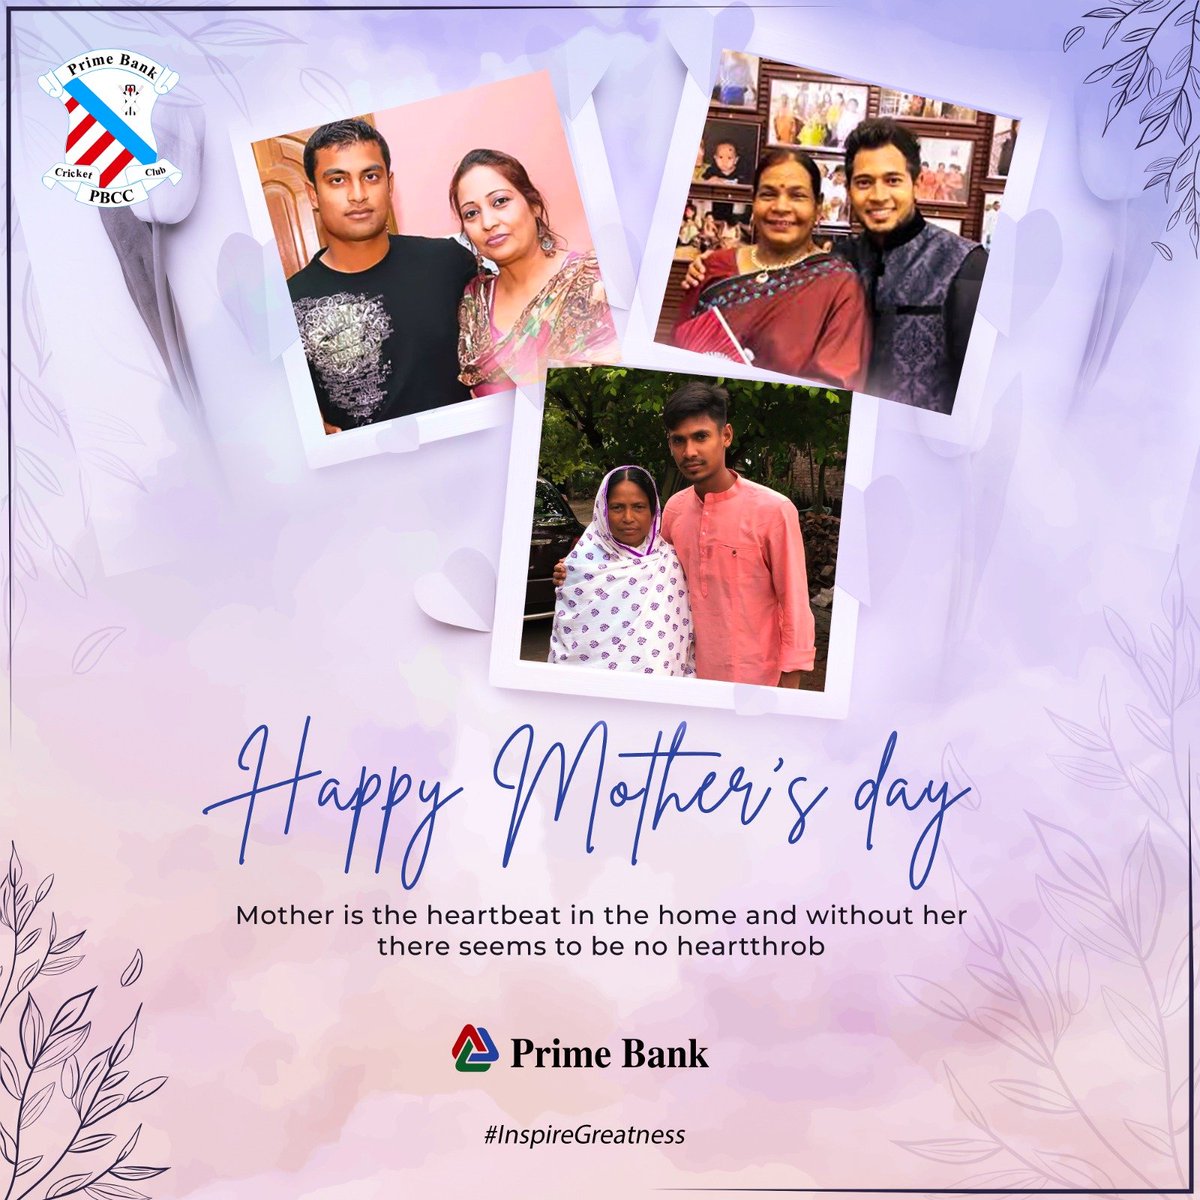 Celebrating the endless love, strength, and sacrifice of mothers worldwide. Happy International Mother's Day! ❤️ #InspireGreatness #PBCC